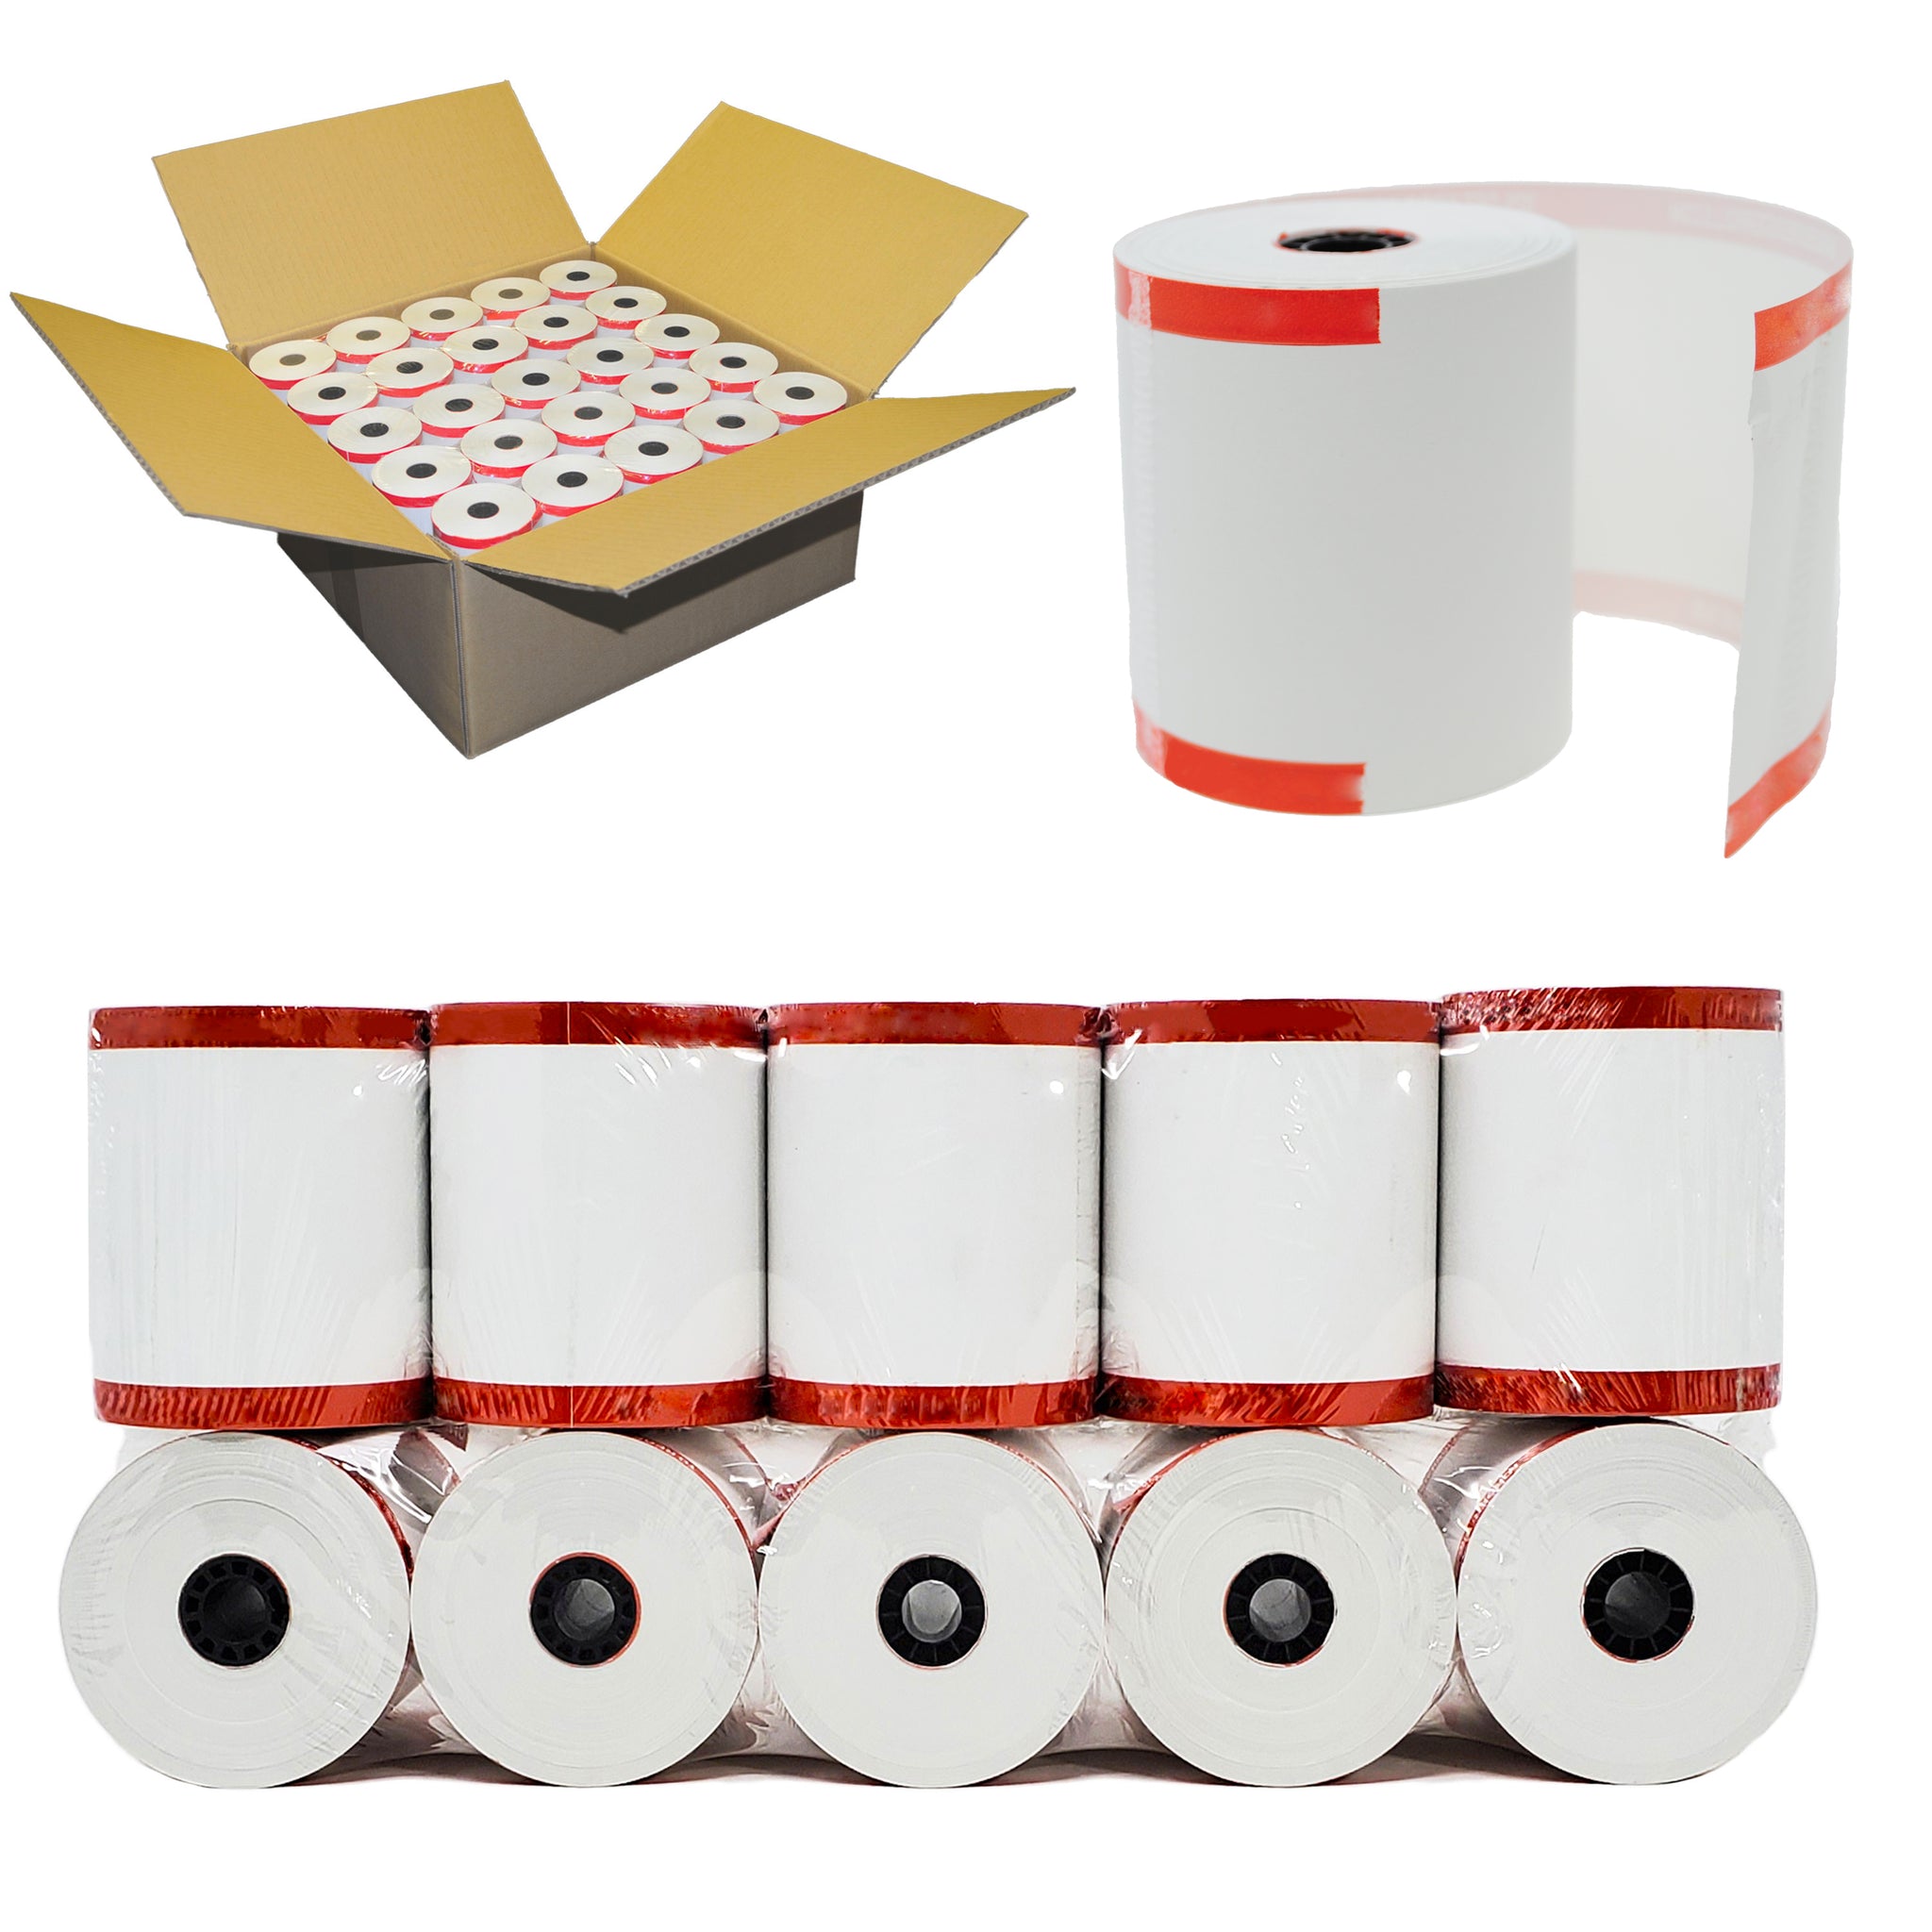 BuyRegisterRolls - (Honey Comb Core) Two Ply Carbonless Rolls 3 X 90 Feet,  White/Yellow (50 Rolls - 1 Case) Kitchen Printer Paper Rolls Required